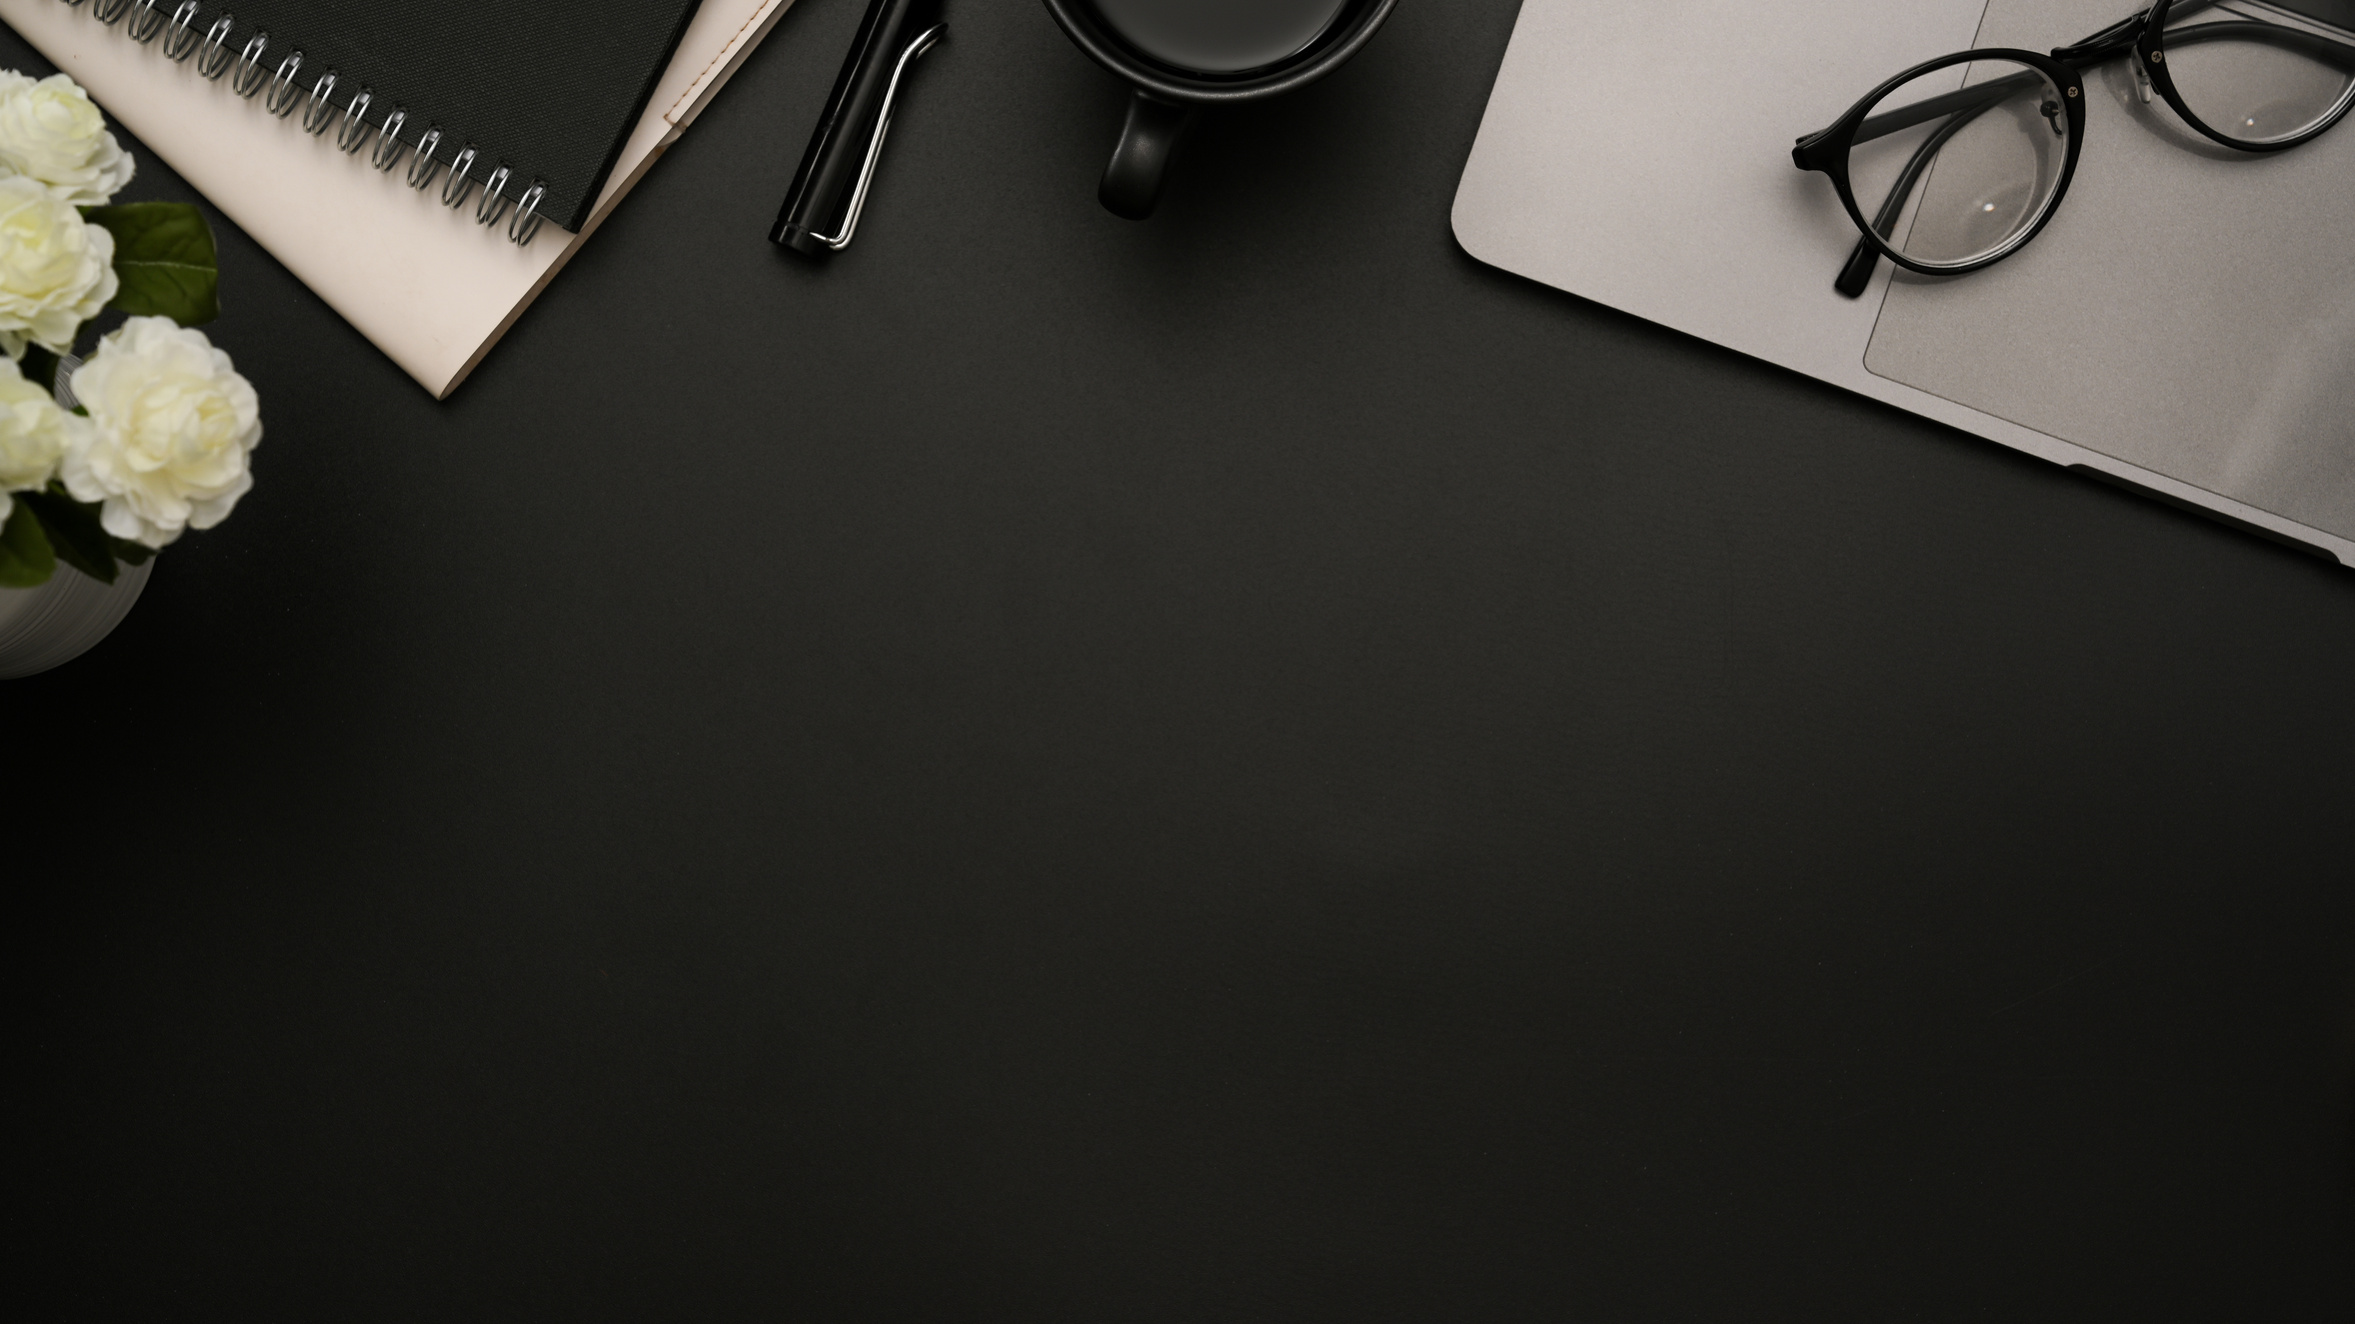 Modern Black Office Desk Workspace Background with Office Access